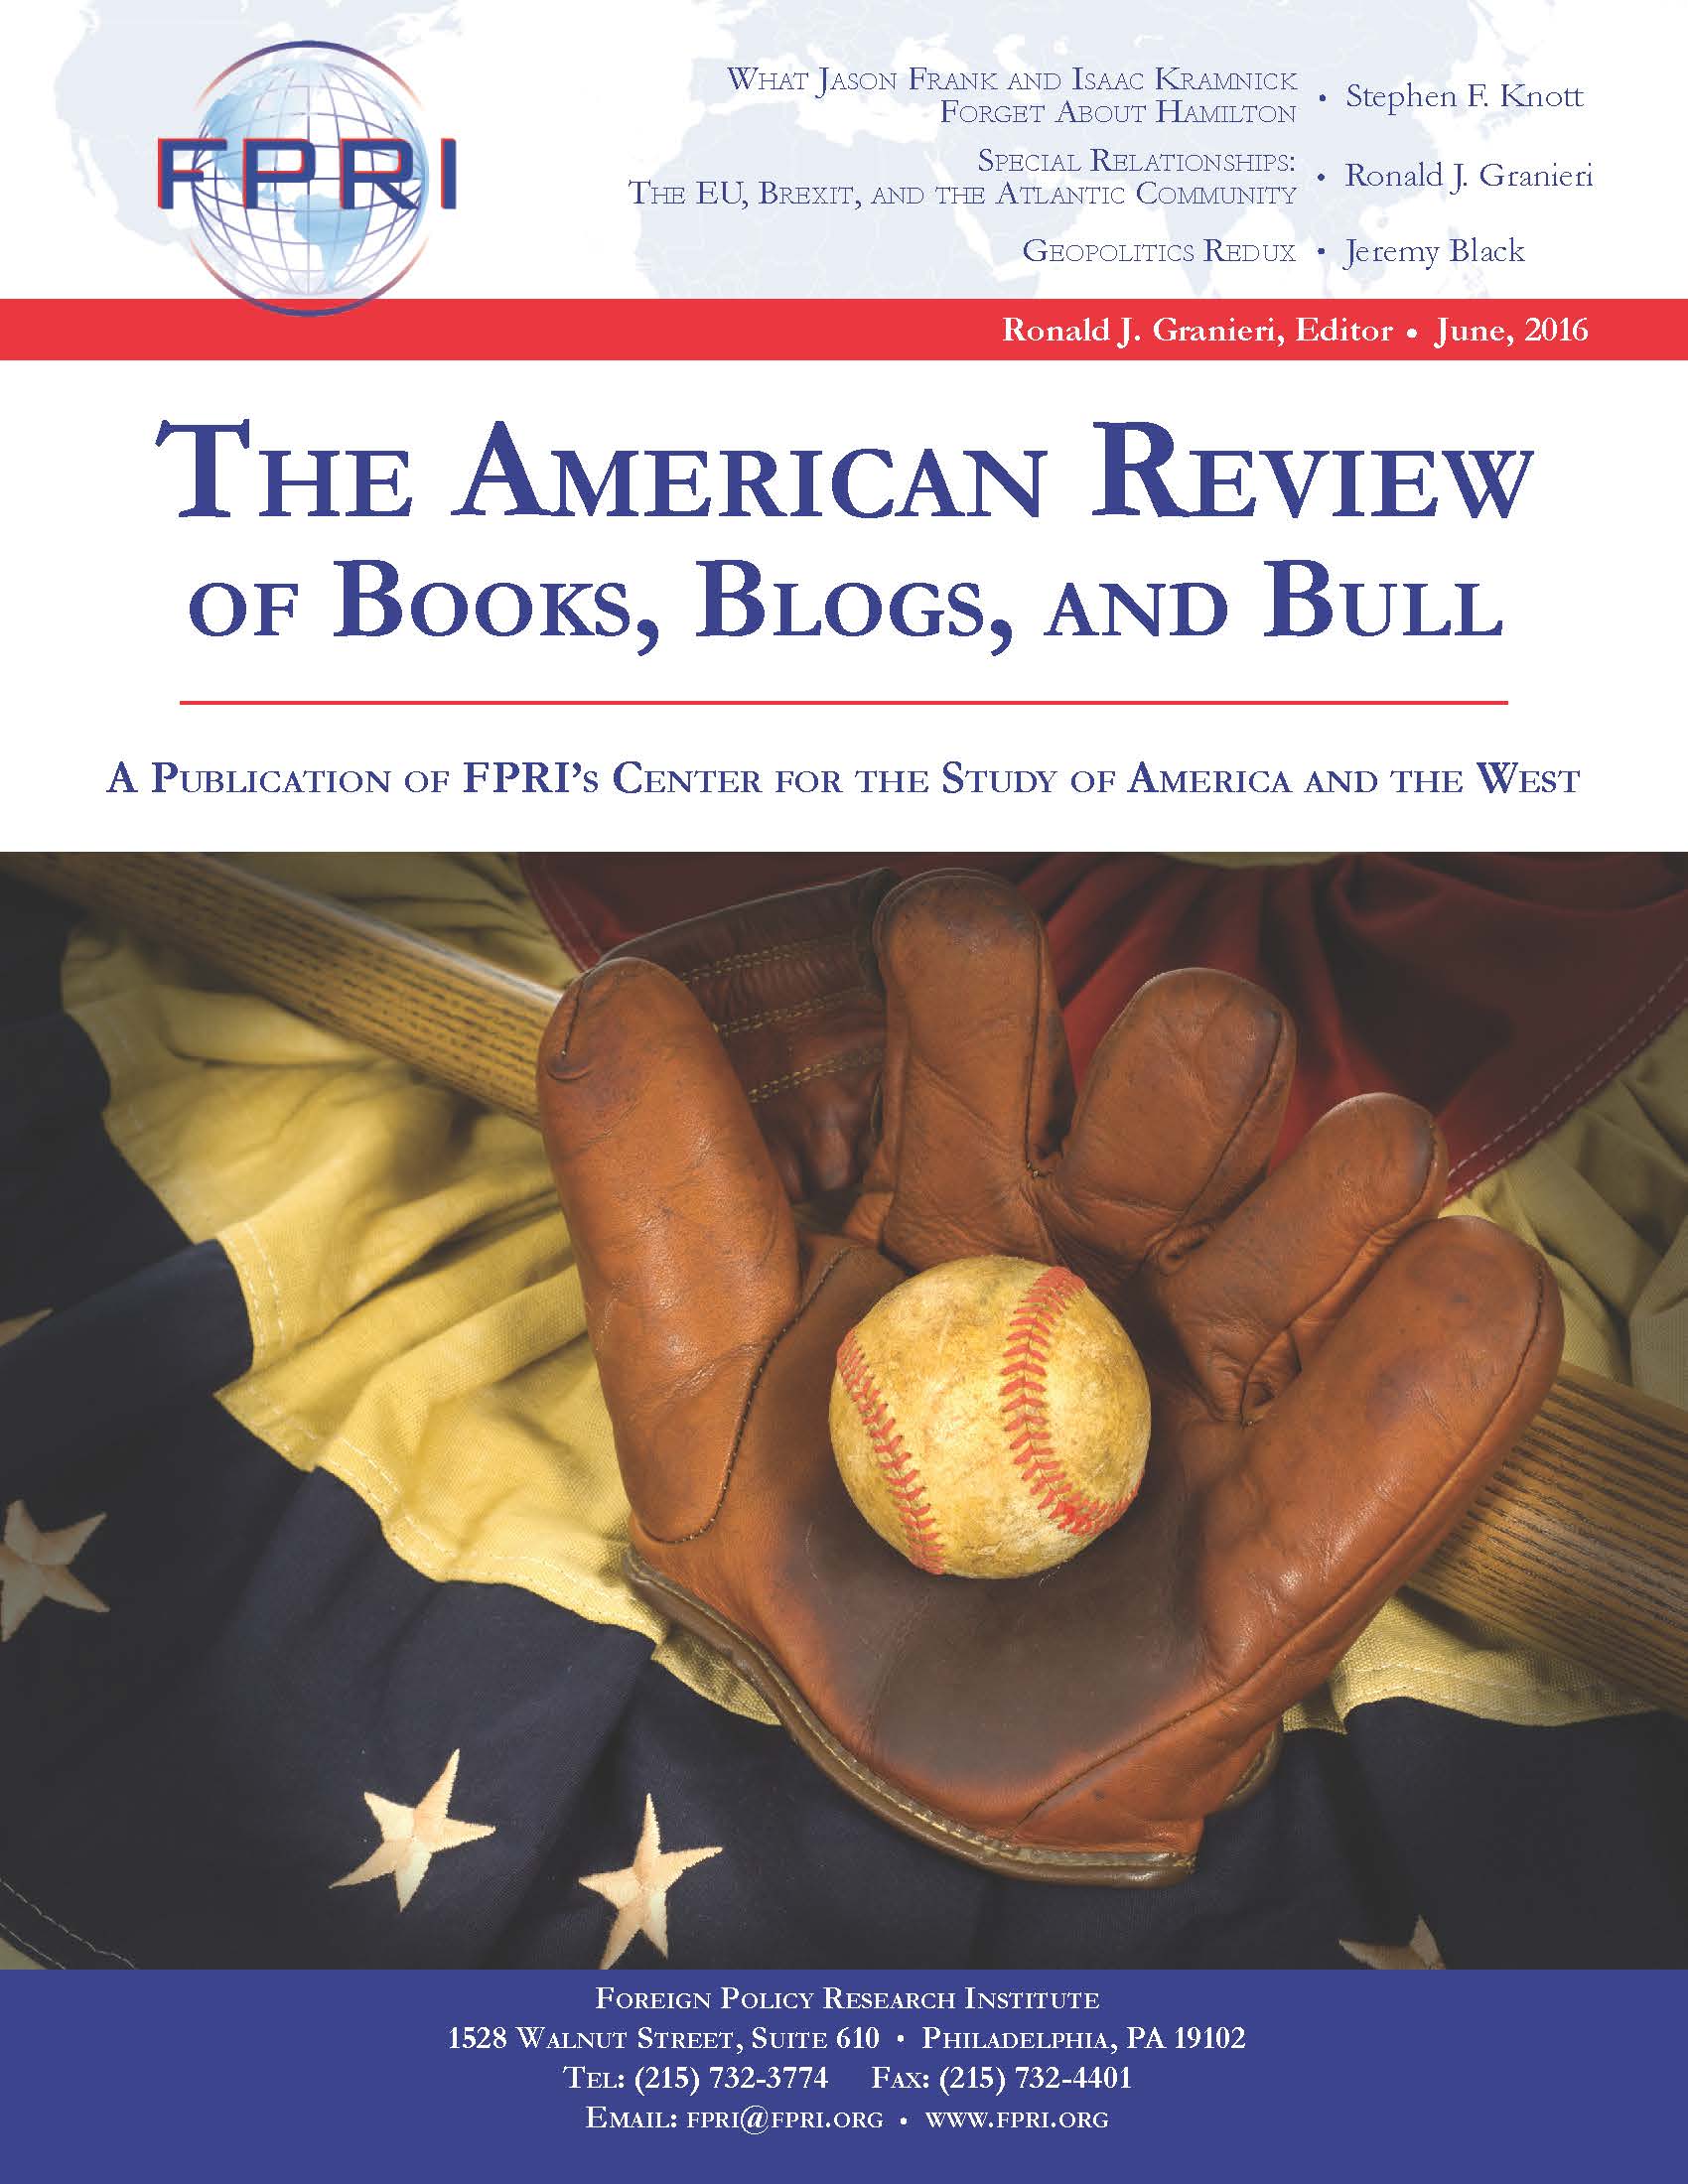 The American Review of Books, Blogs, and Bull – Issue 6